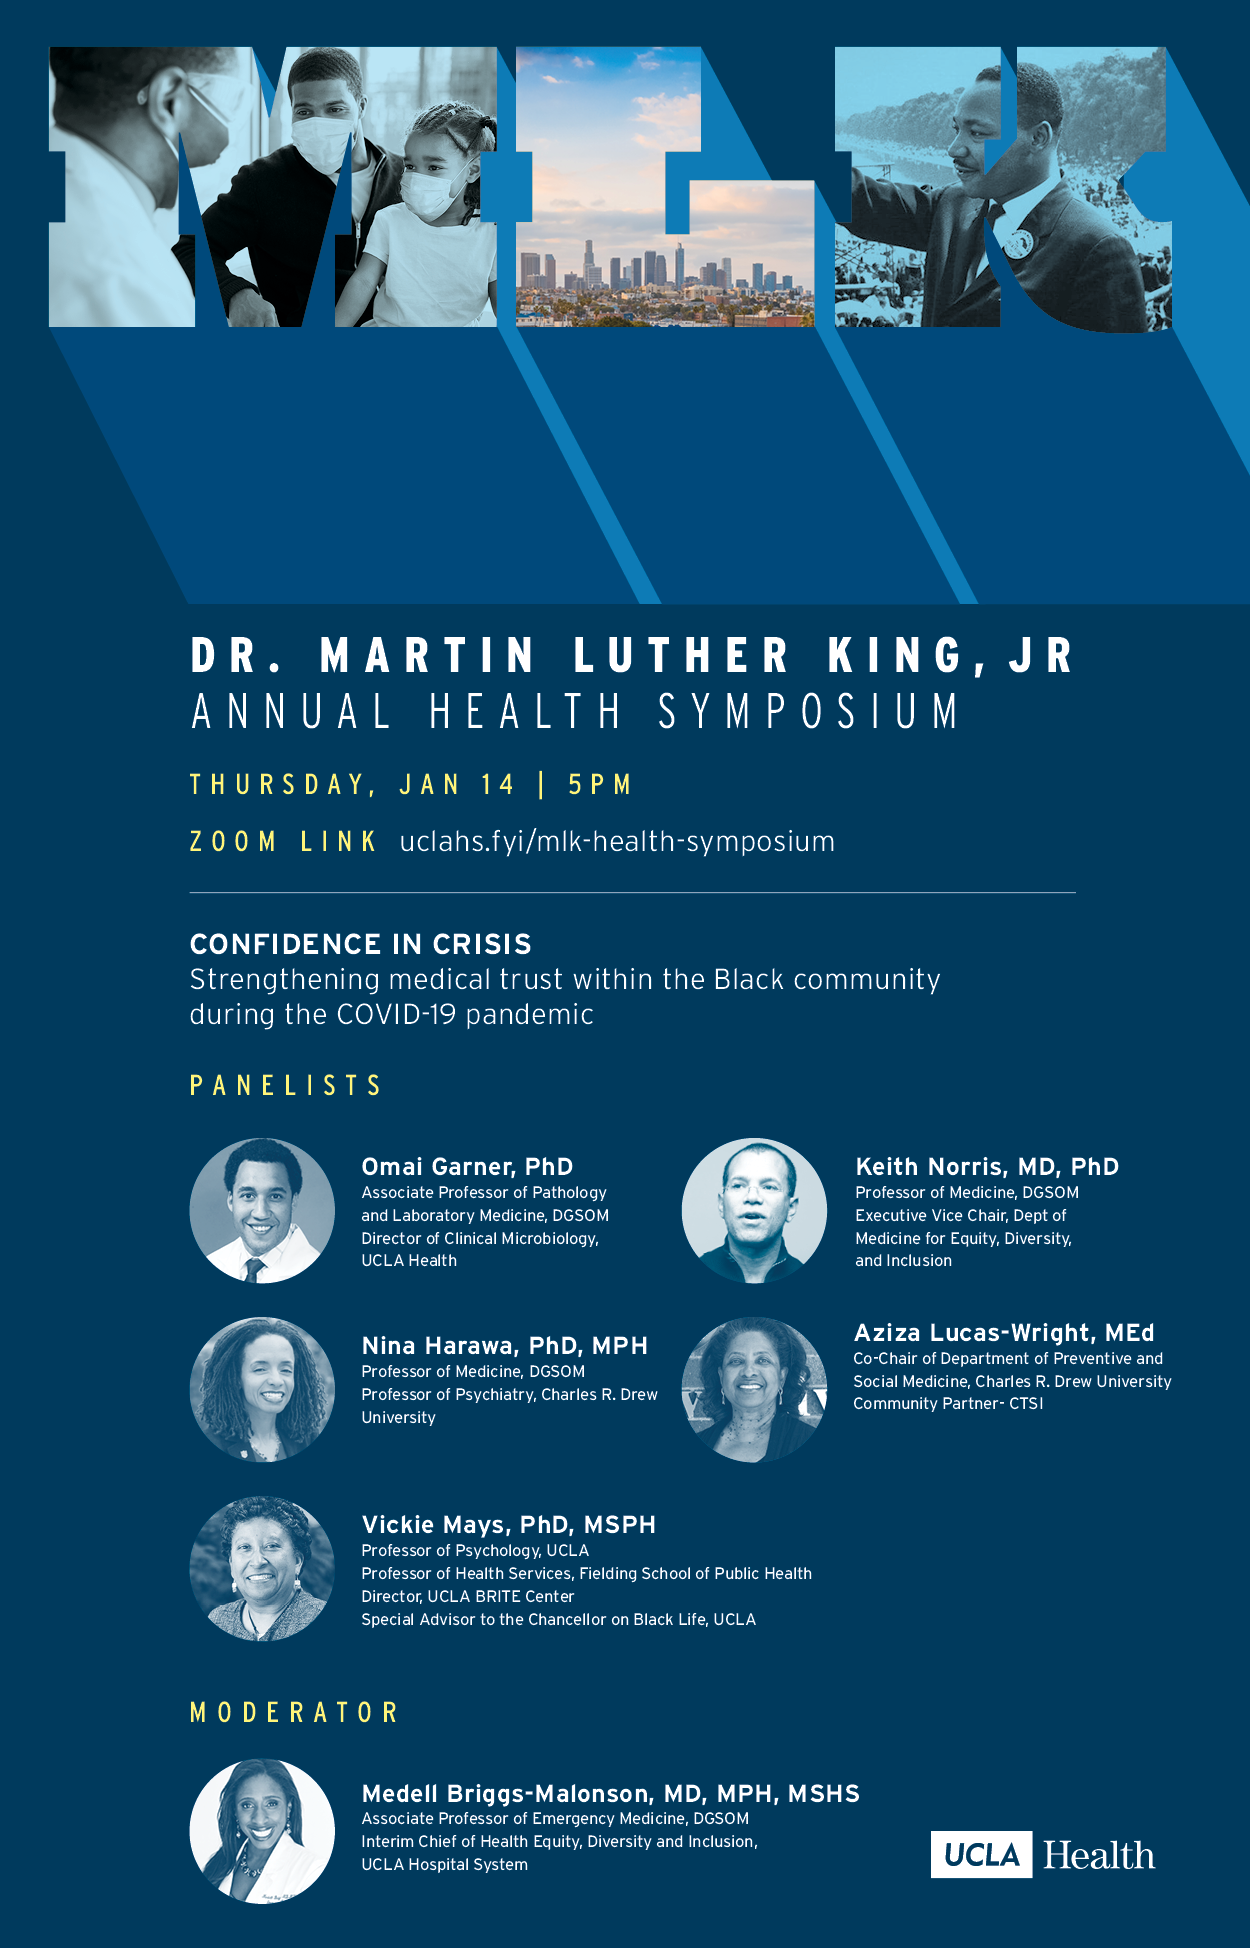 UCLA Health: Dr. Martin Luther King, Jr. Annual Health Symposium